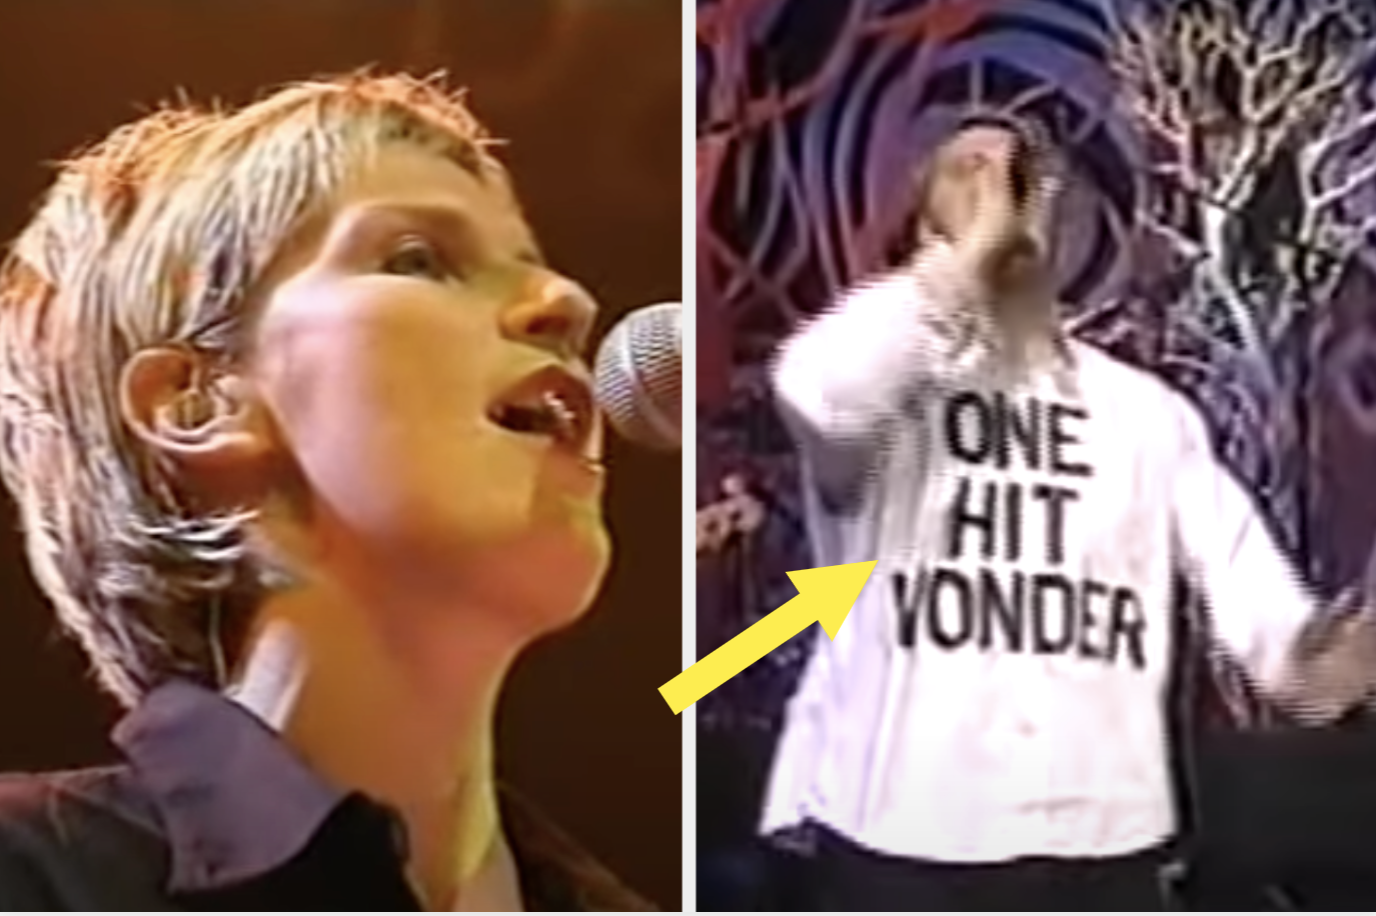 The lead singer performs Tubthumping wearing a &quot;One Hit Wonder&quot; shirt